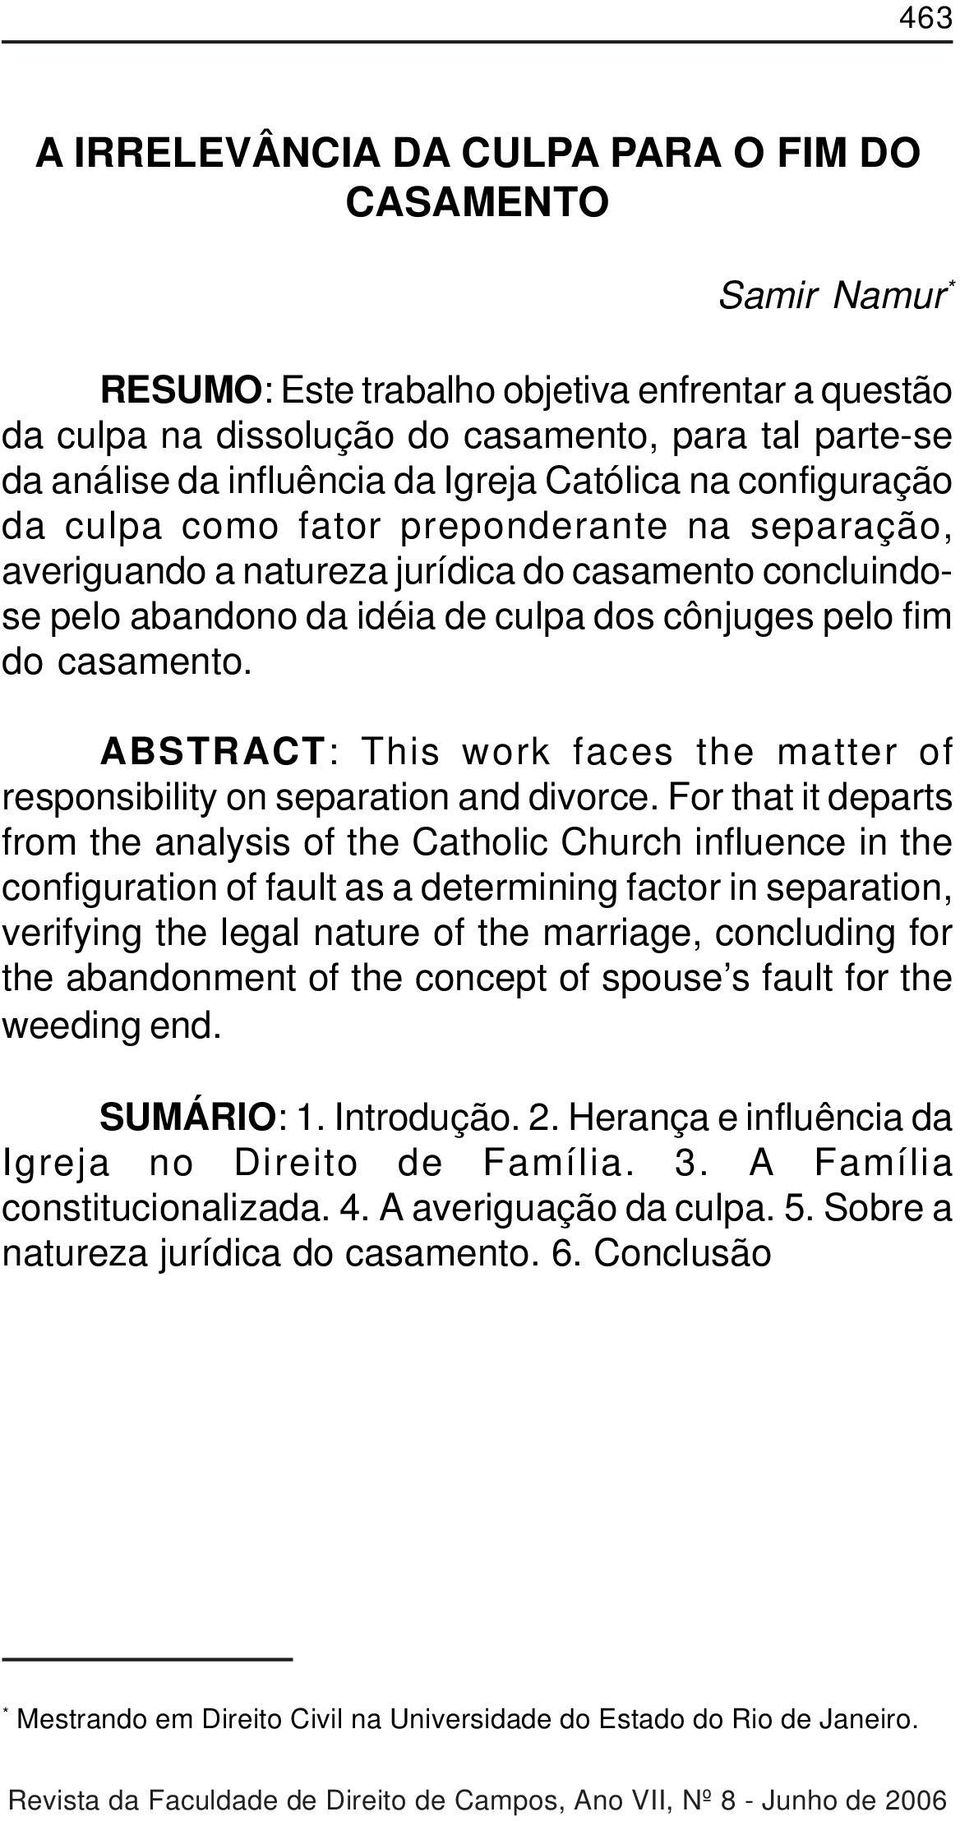 pelo fim do casamento. ABSTRACT: This work faces the matter of responsibility on separation and divorce.